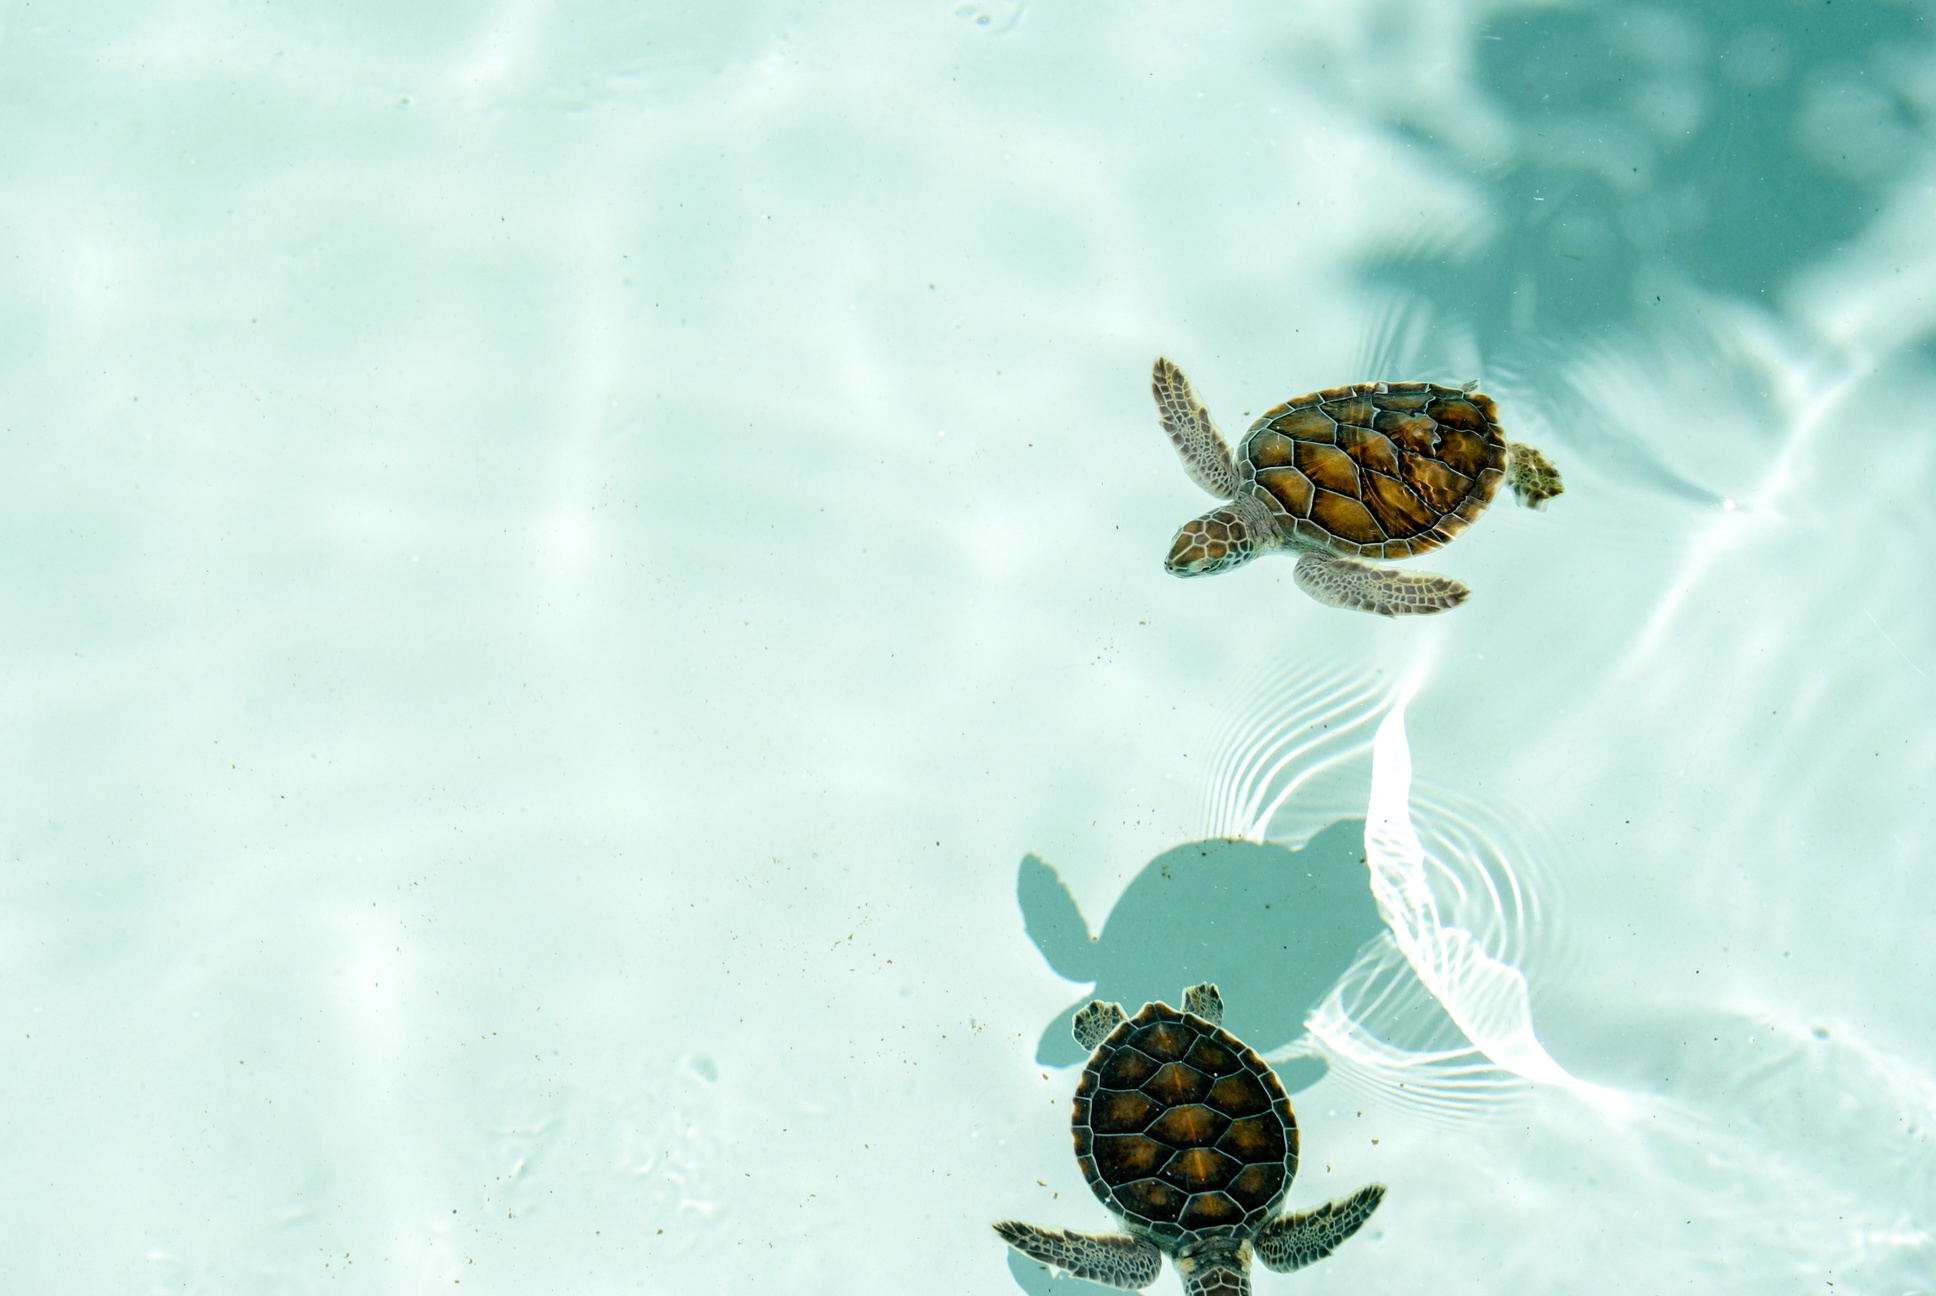 Two Baby Sea Turtles Swimming in the Pool